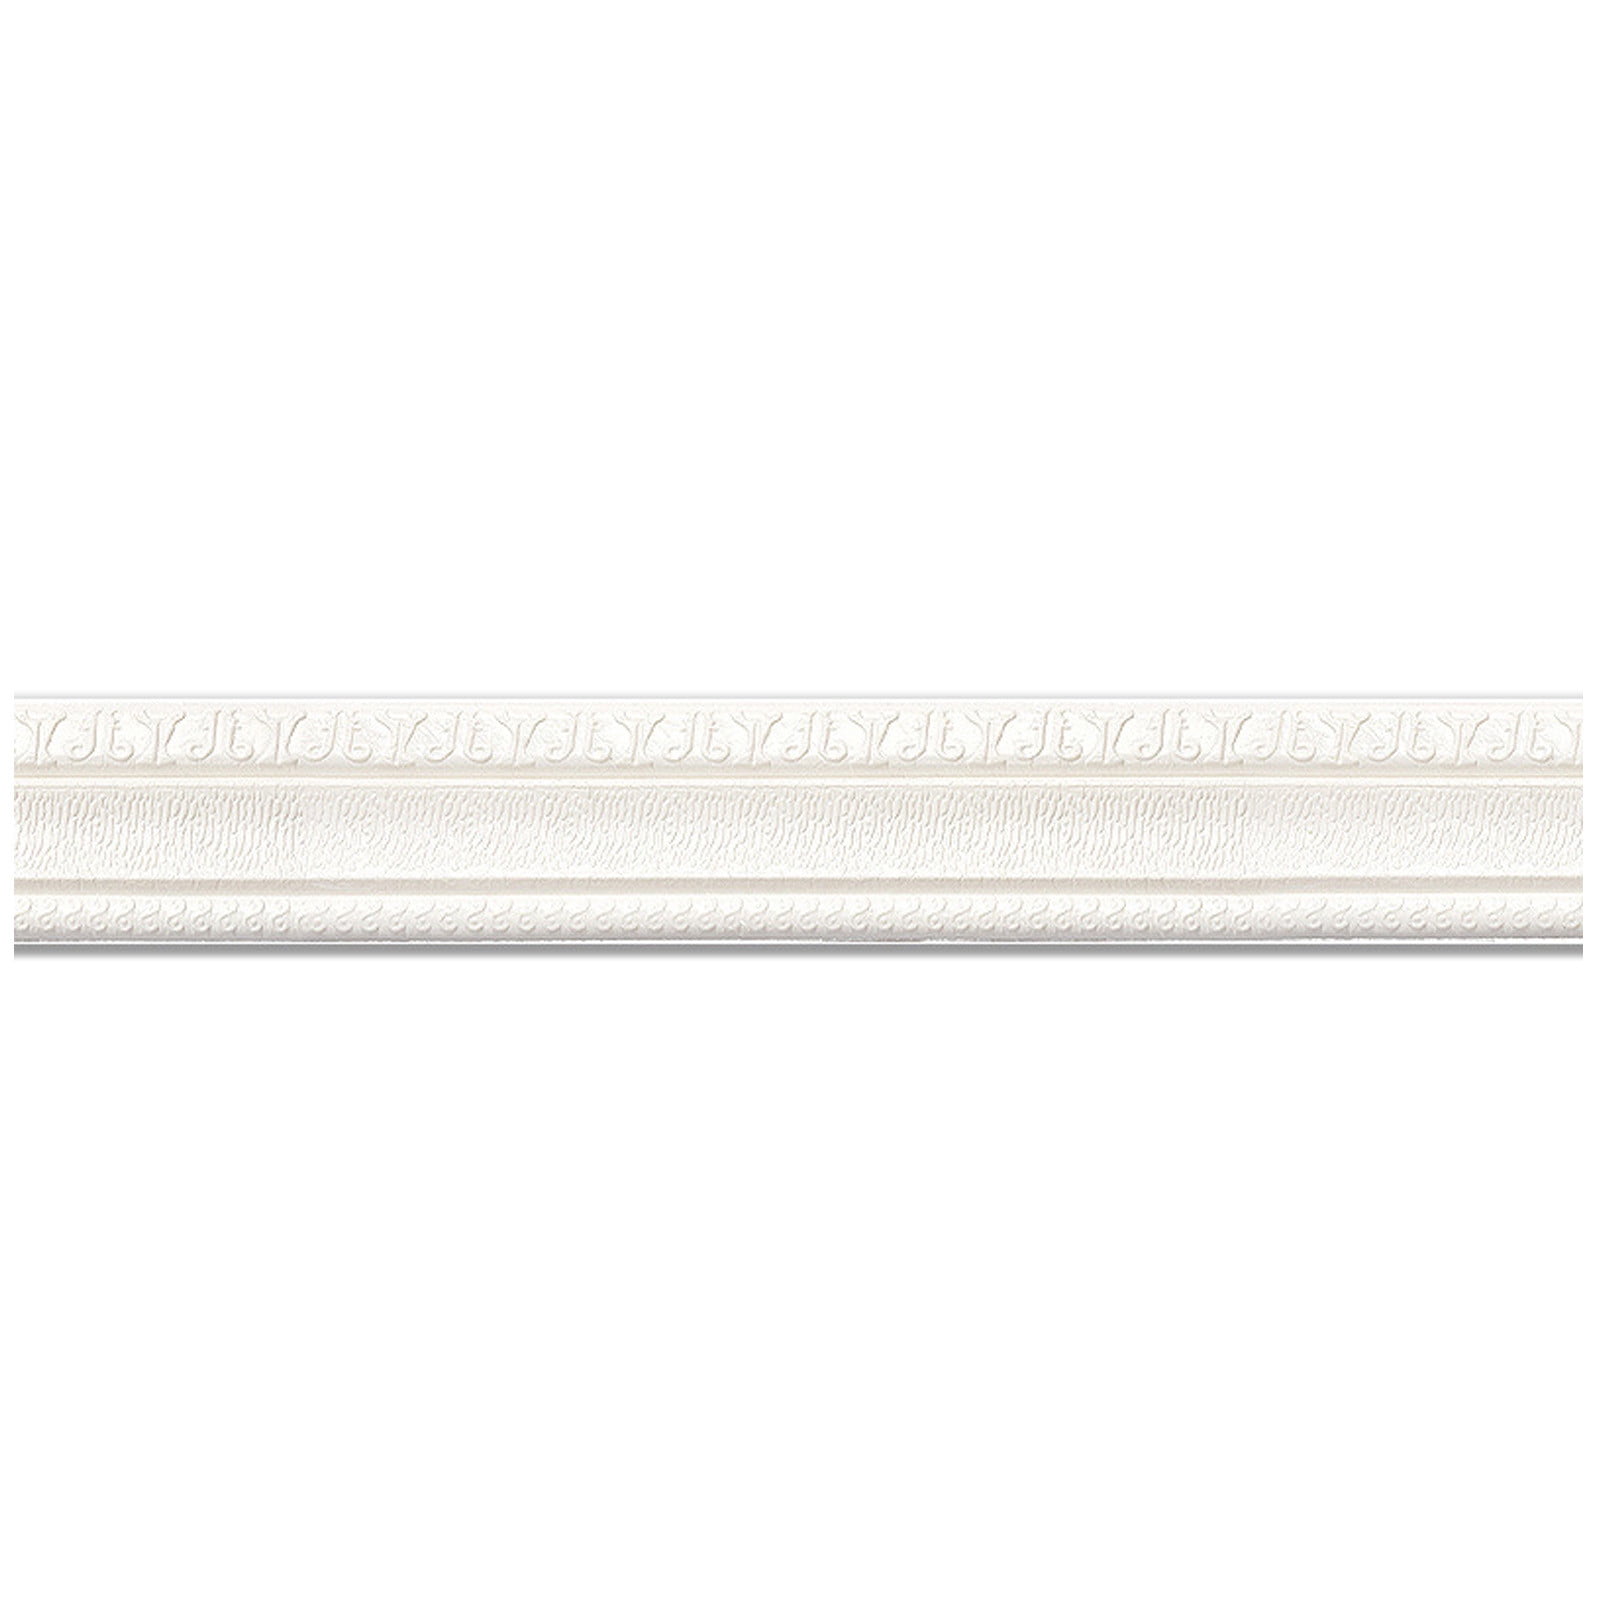 Peel and Stick Molding - Flexible Molding Trim Self Adhesive (9.8 Feet  Long) Crown Molding Peel and Stick molding for Baseboard, Mirror Trim, Wall